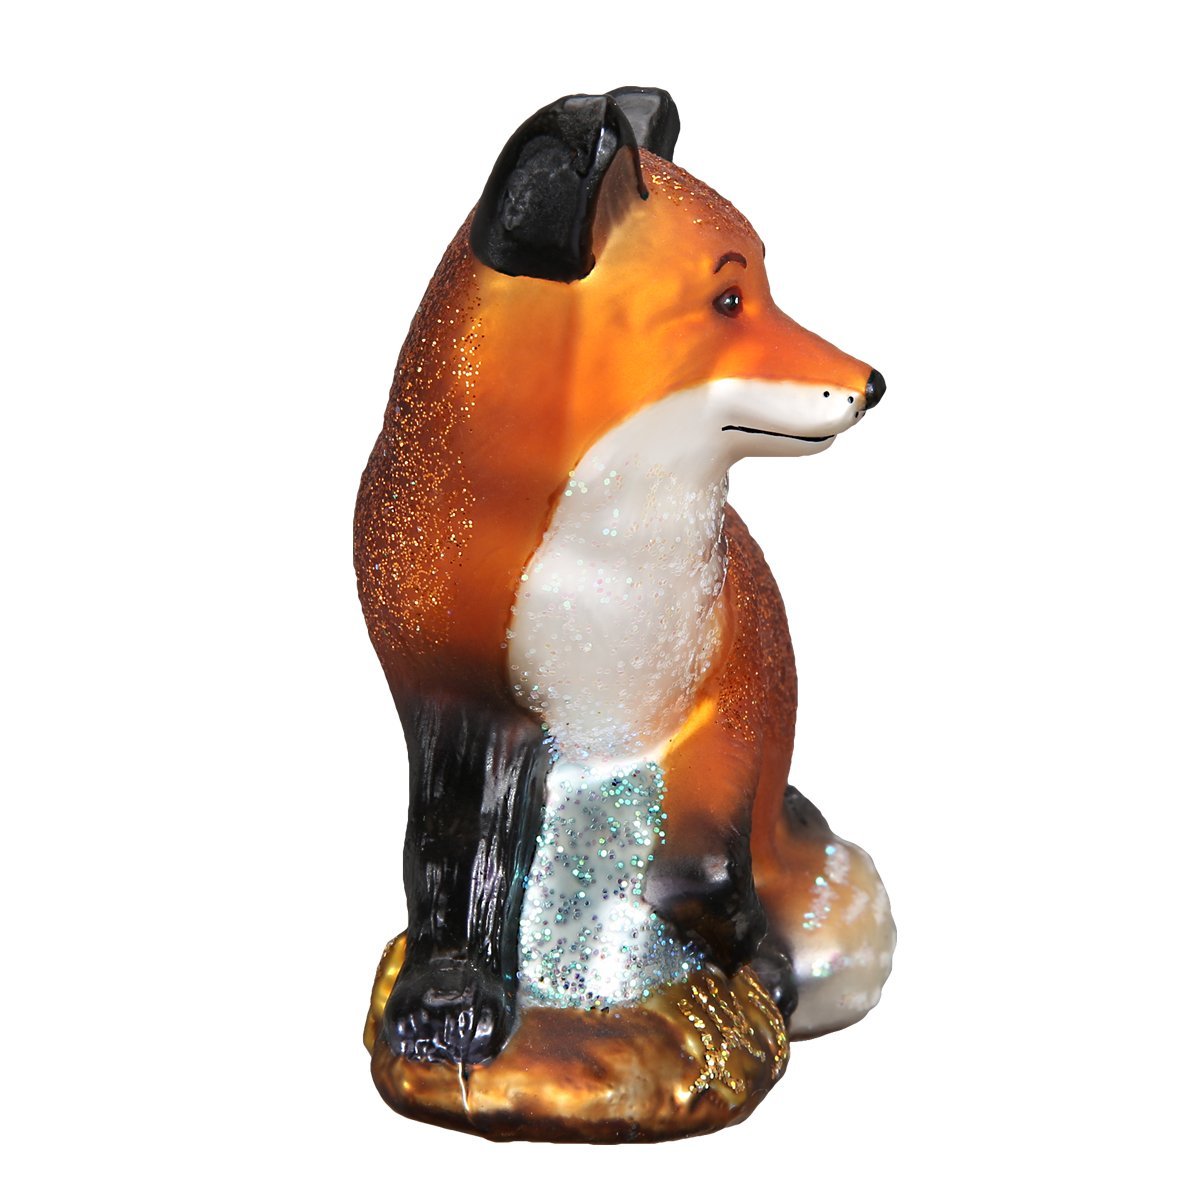 red fox christmas ornament glass hand-painted cunning trickster wise forest holiday gift front old world side